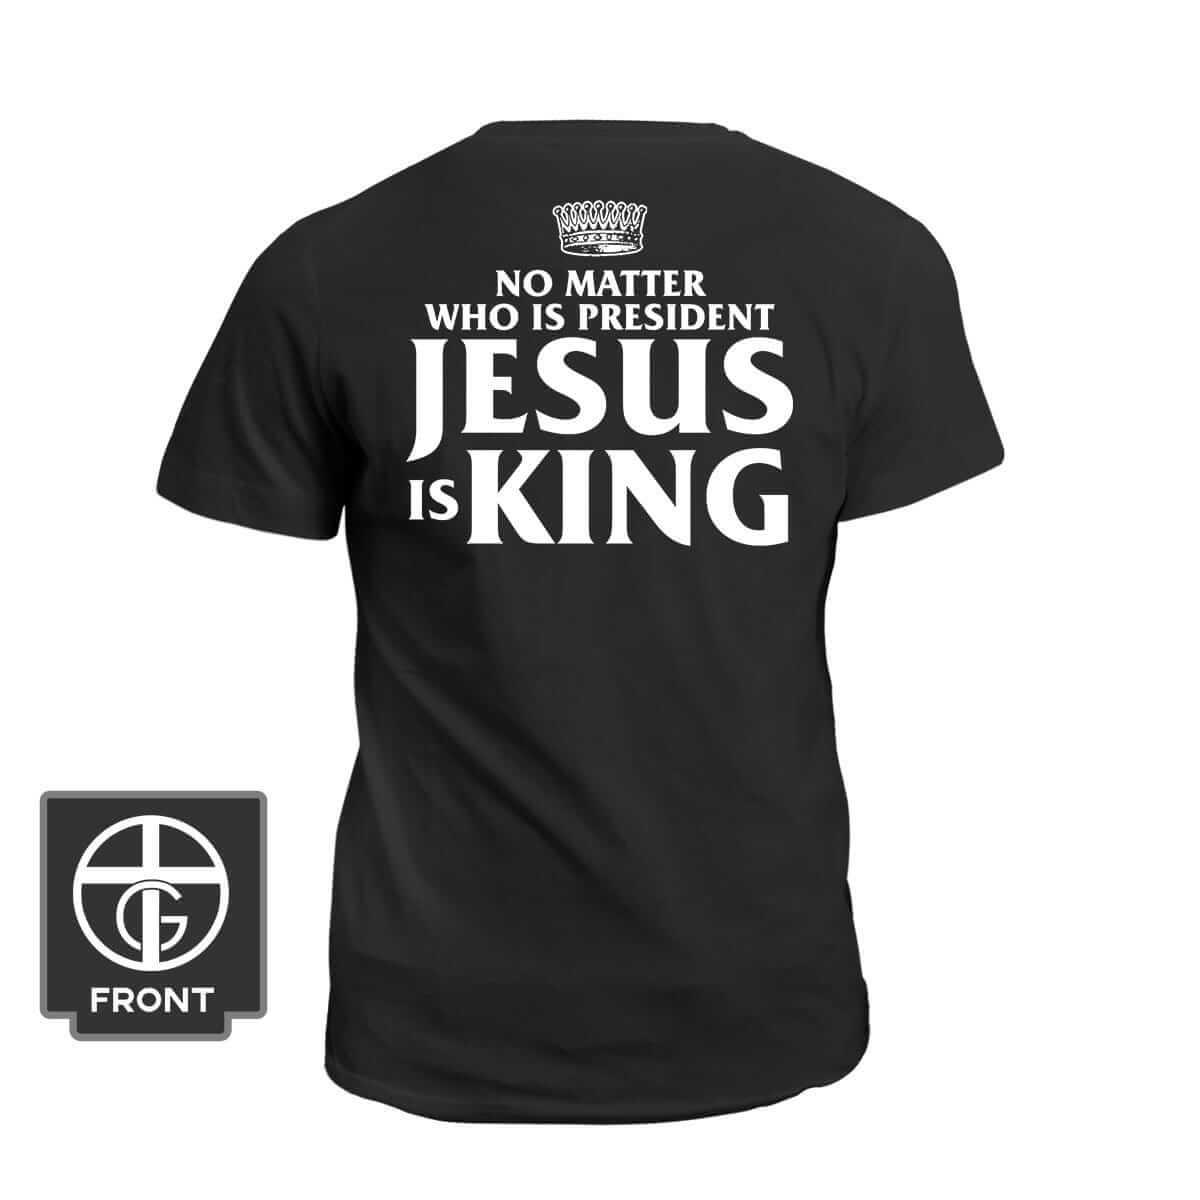 No Matter Who Is President Jesus is King (Back Print)